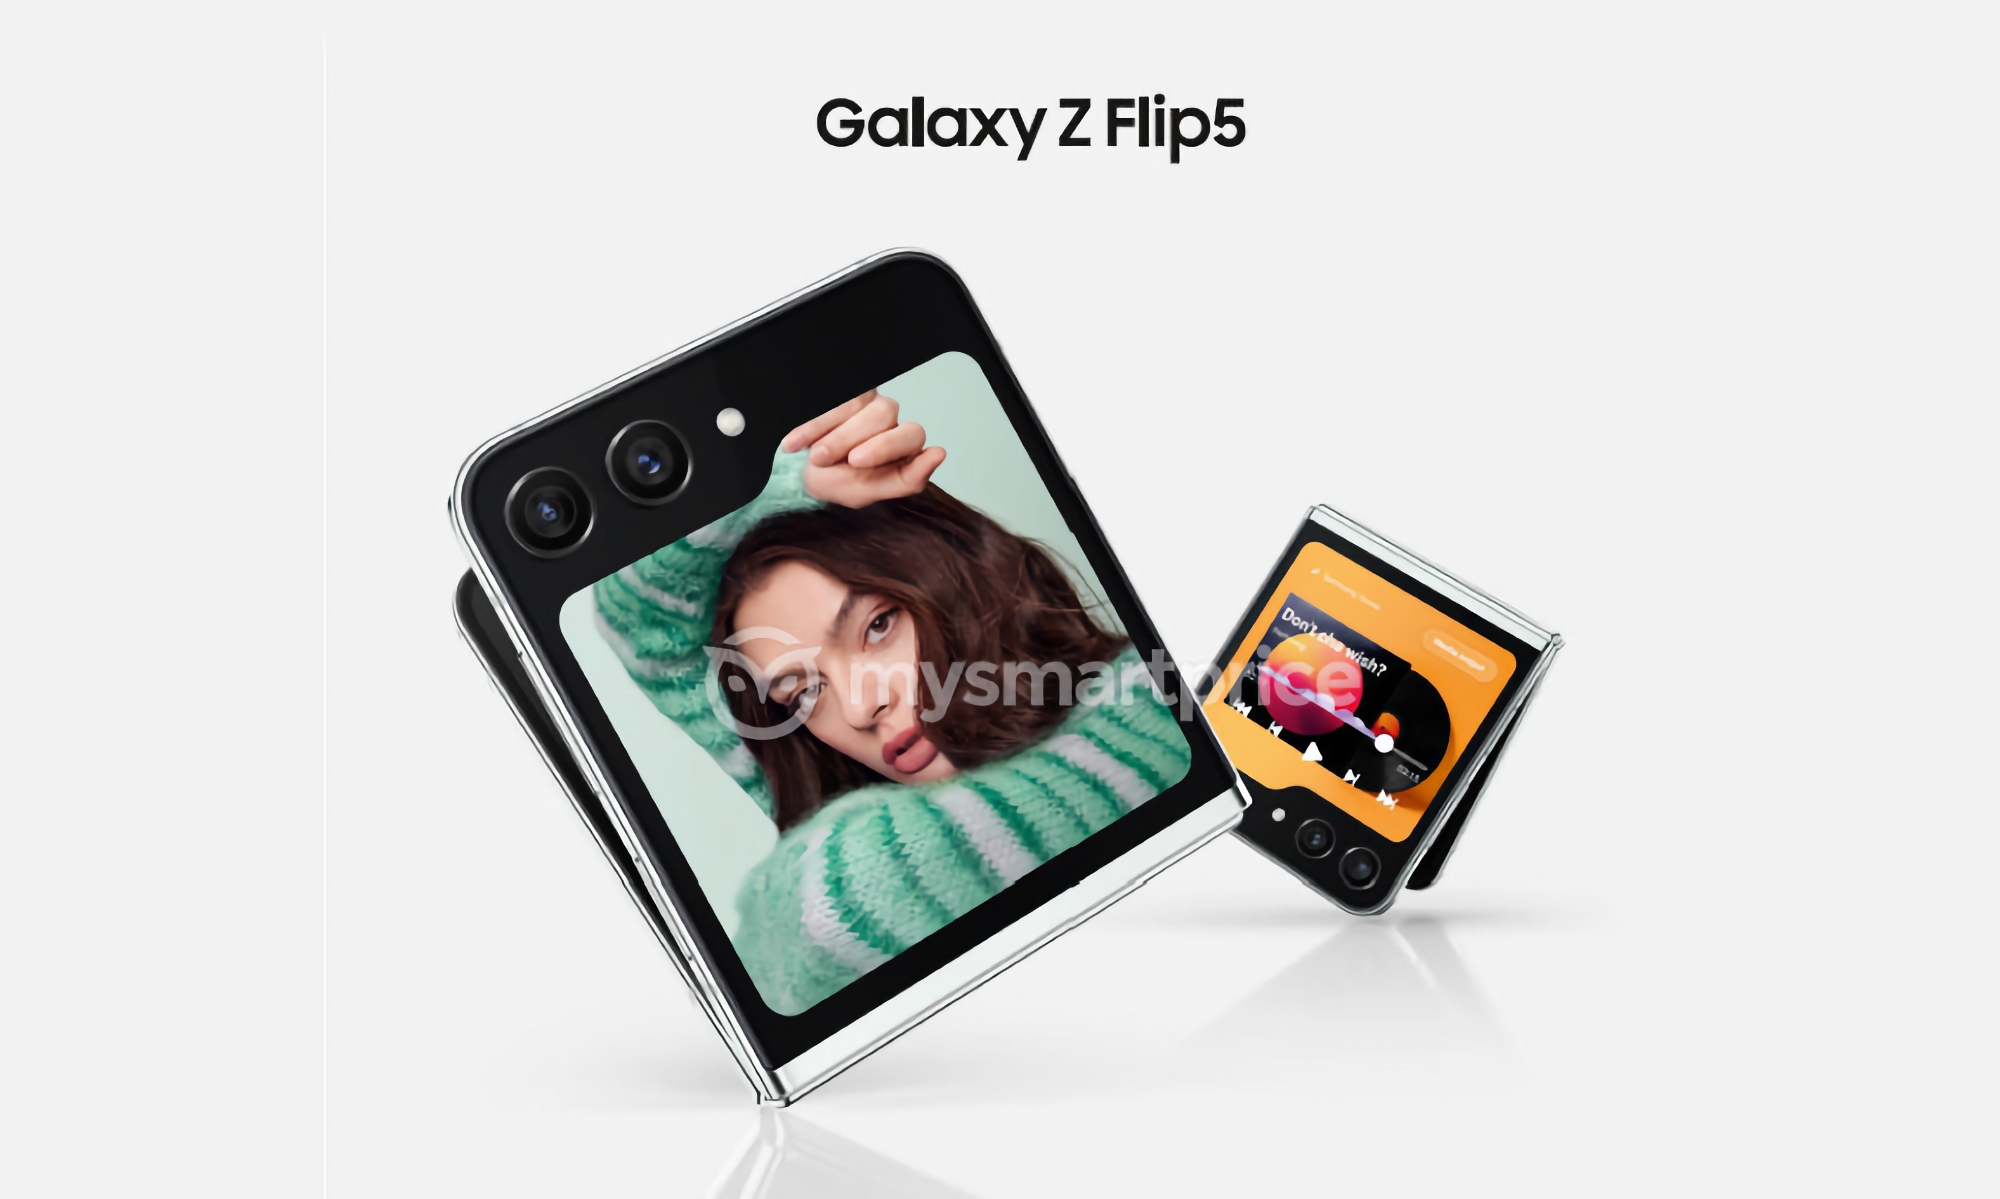 Following the Galaxy Fold 5: the first official image of the Galaxy Flip 5 has surfaced online